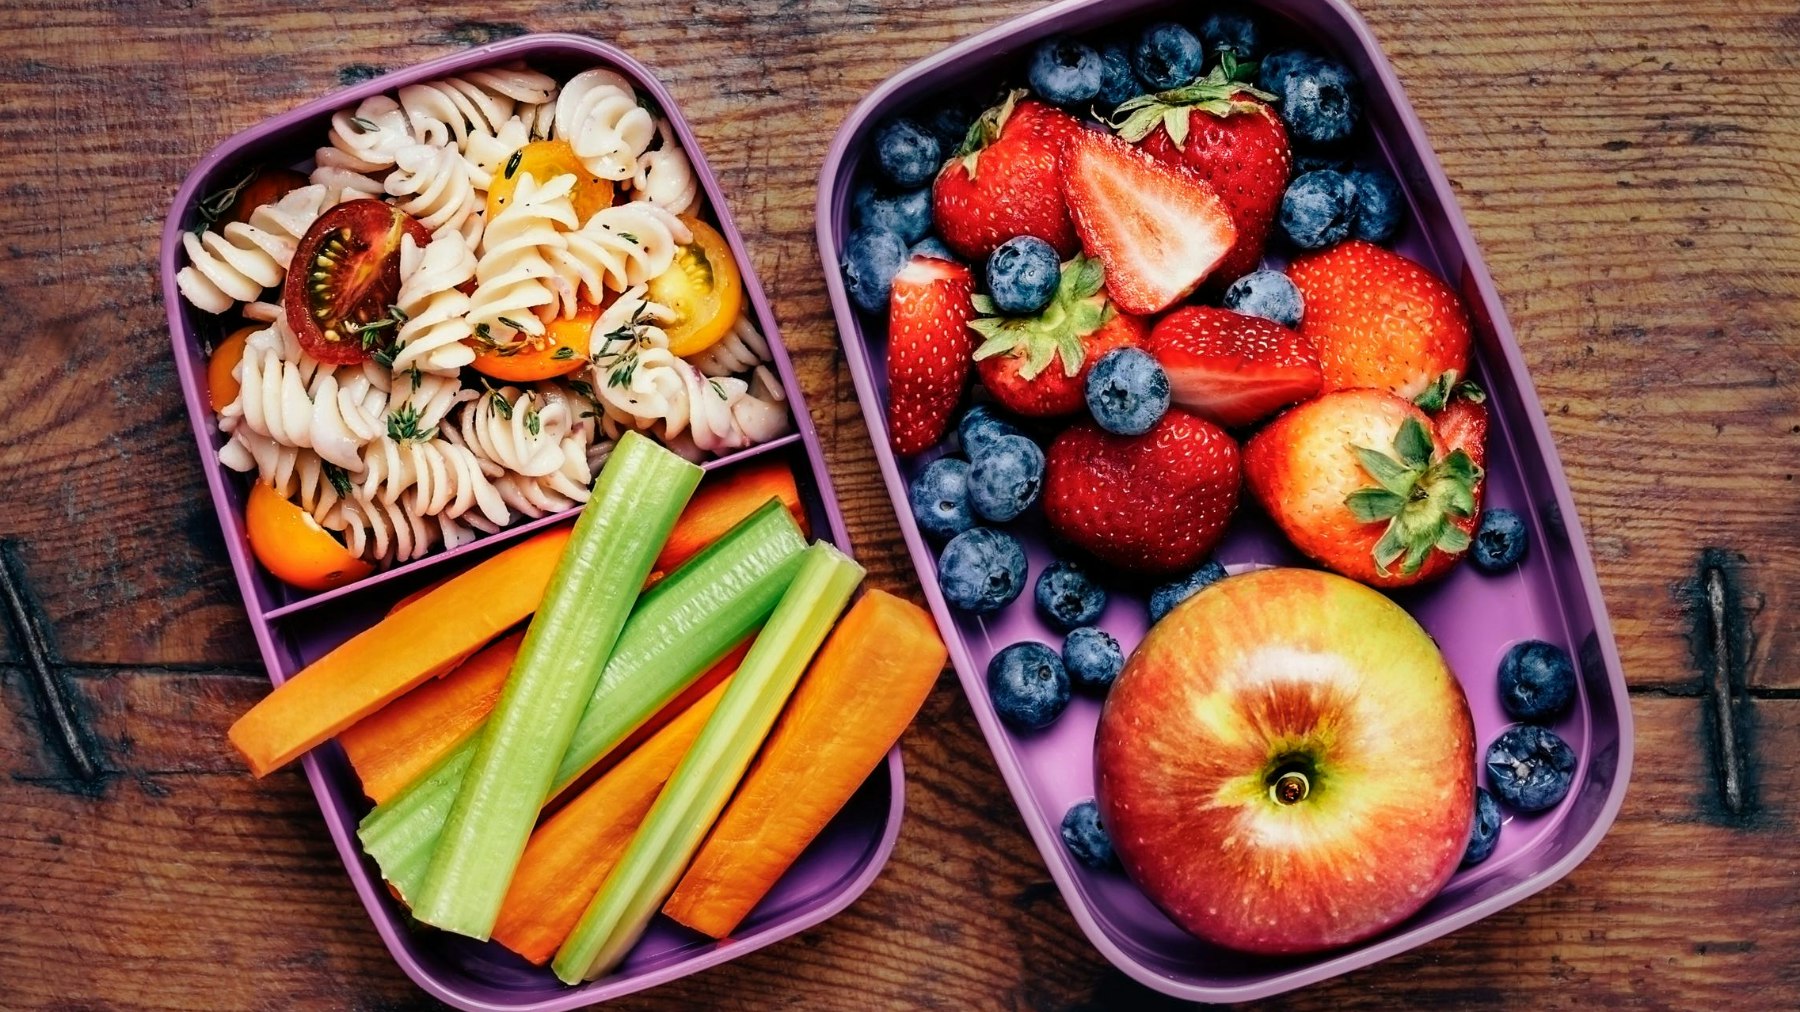 Simple school lunchbox ideas to keep kids happy and costs low